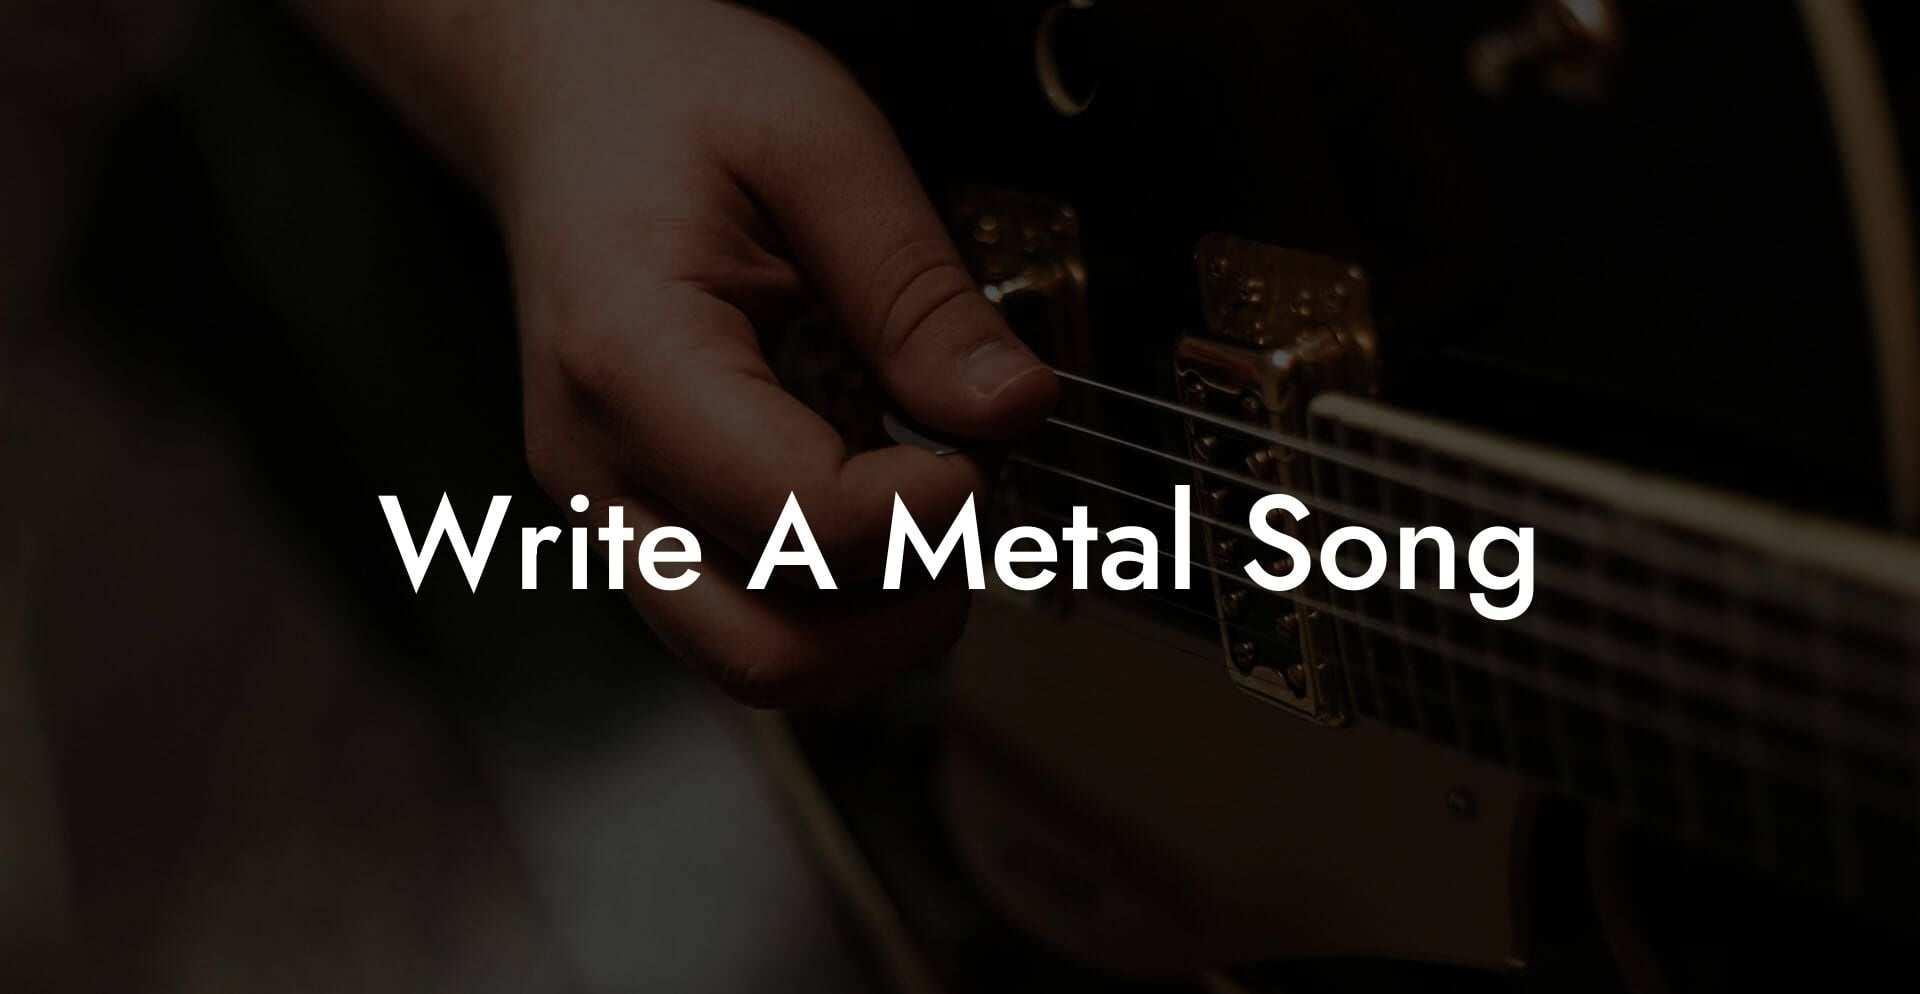 write a metal song lyric assistant